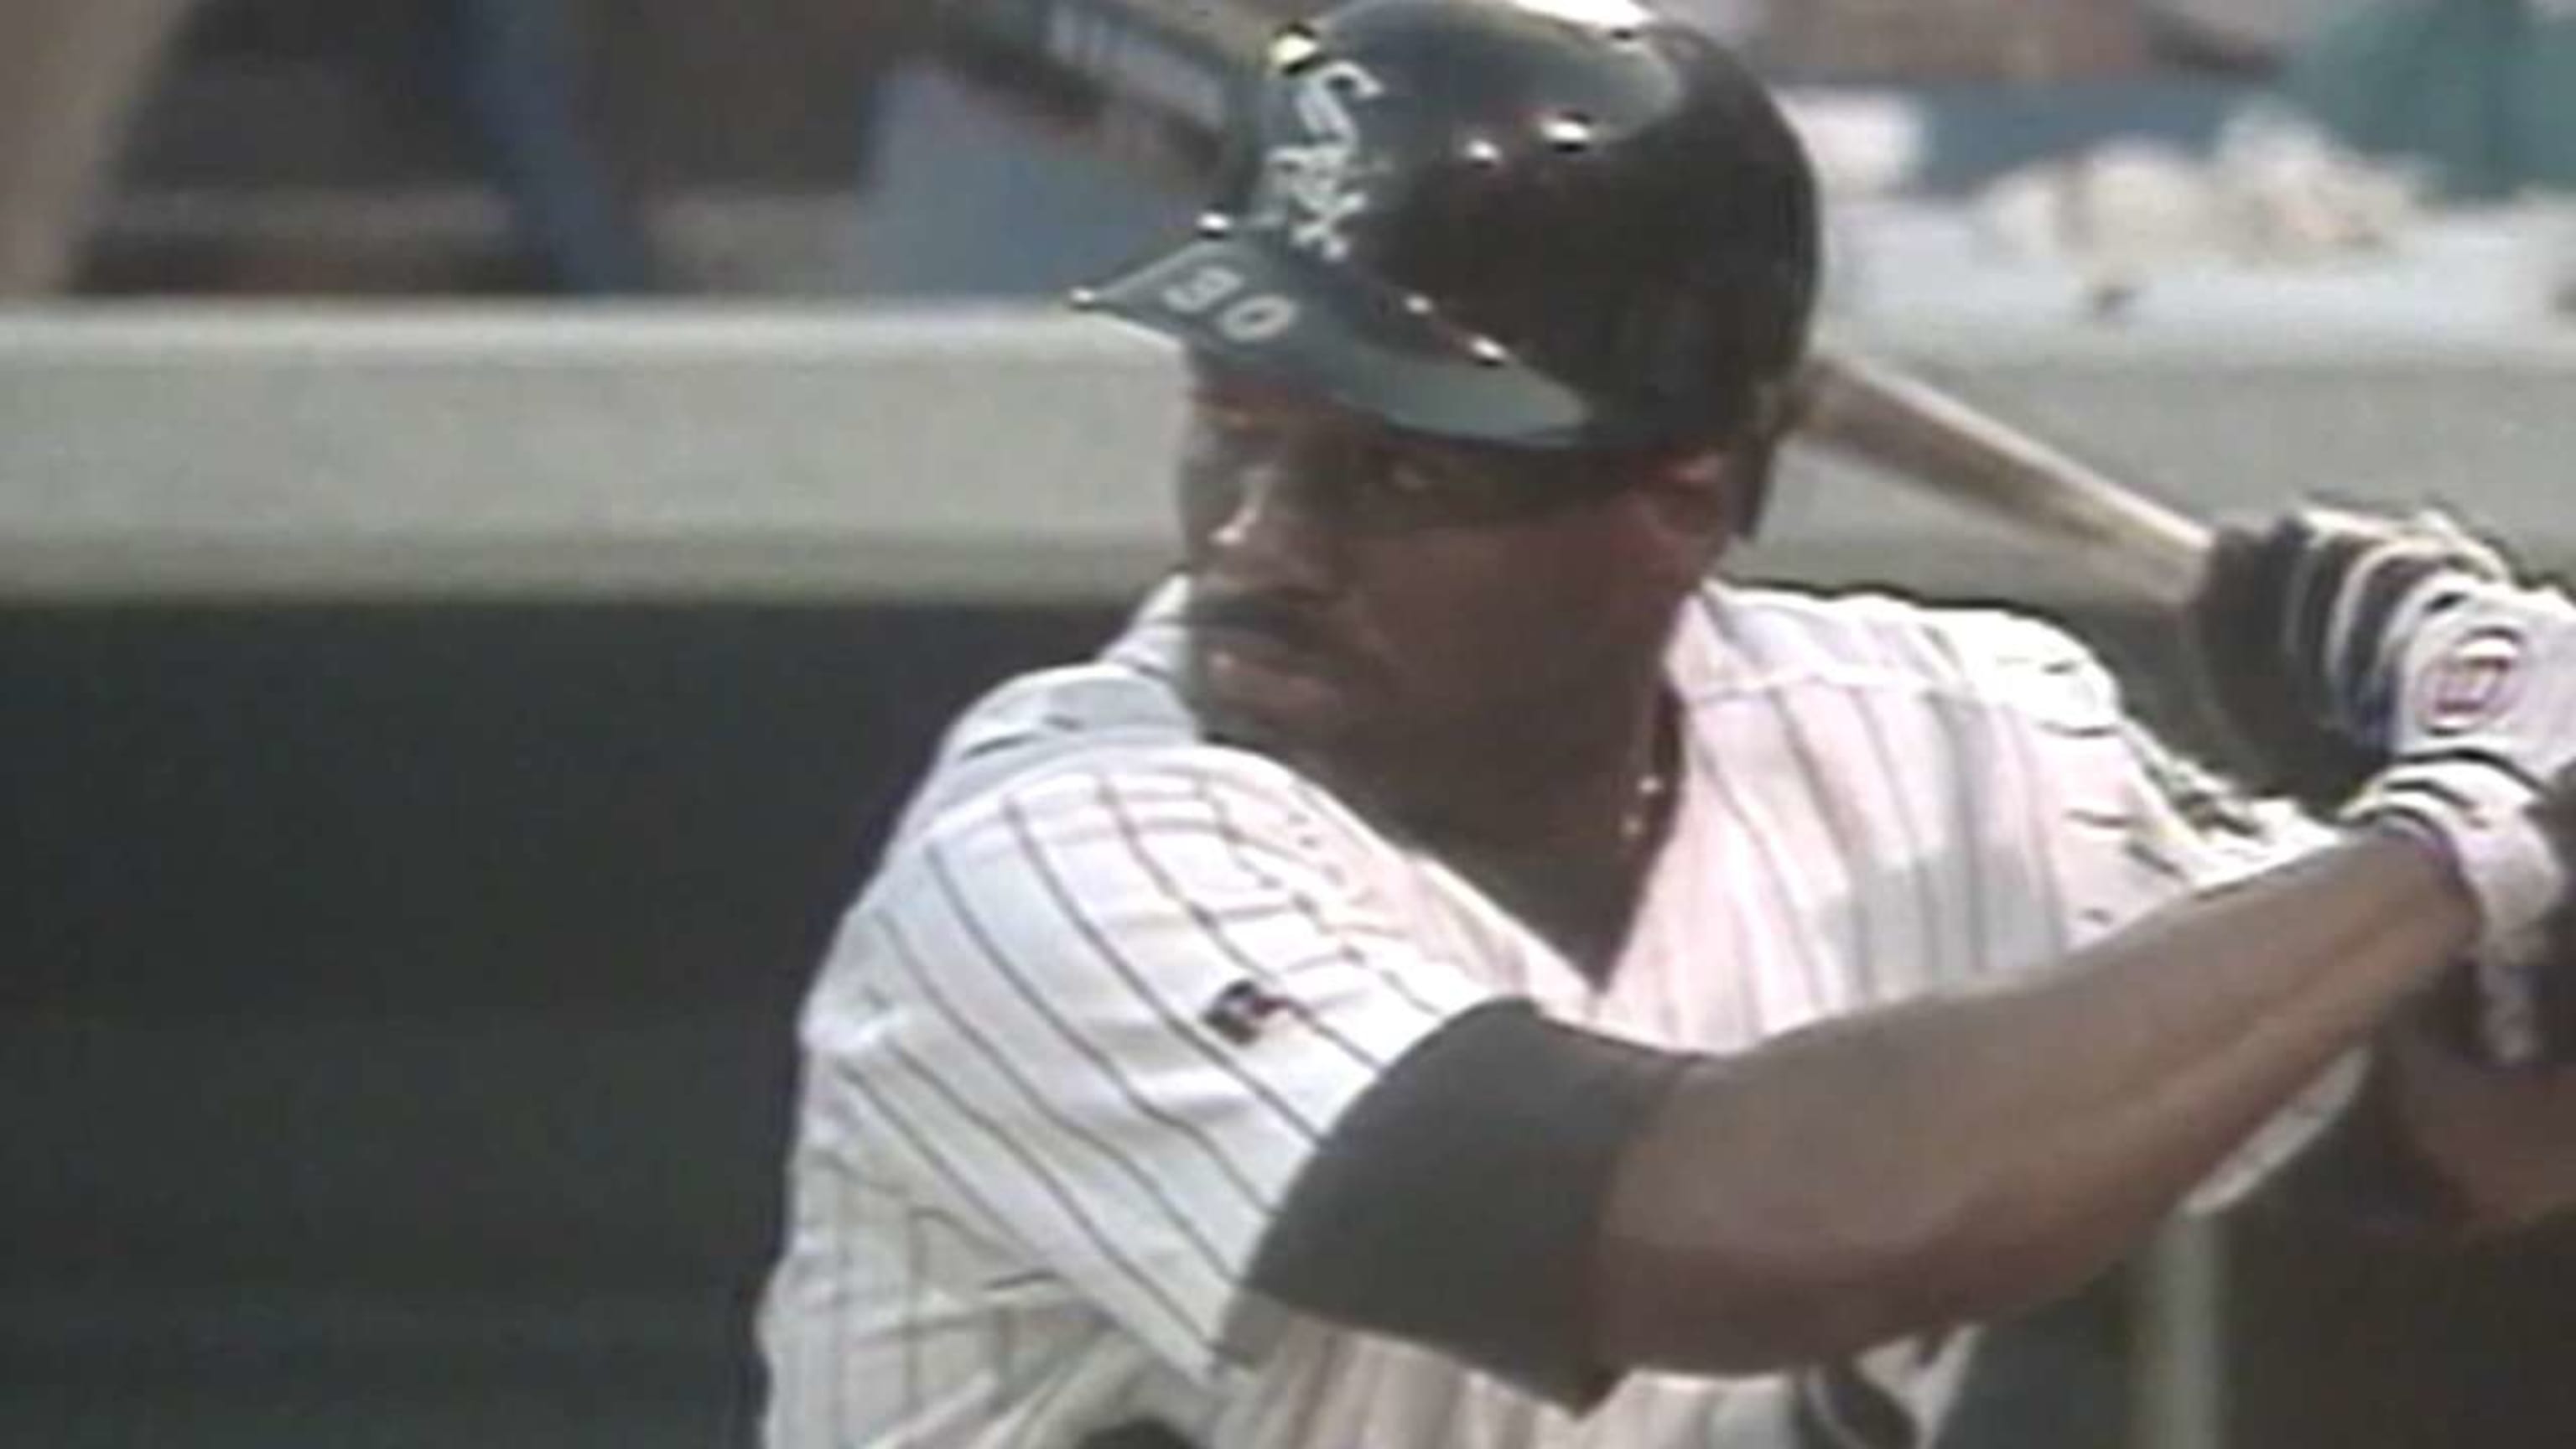 Tim Raines in last year on Hall of Fame ballot